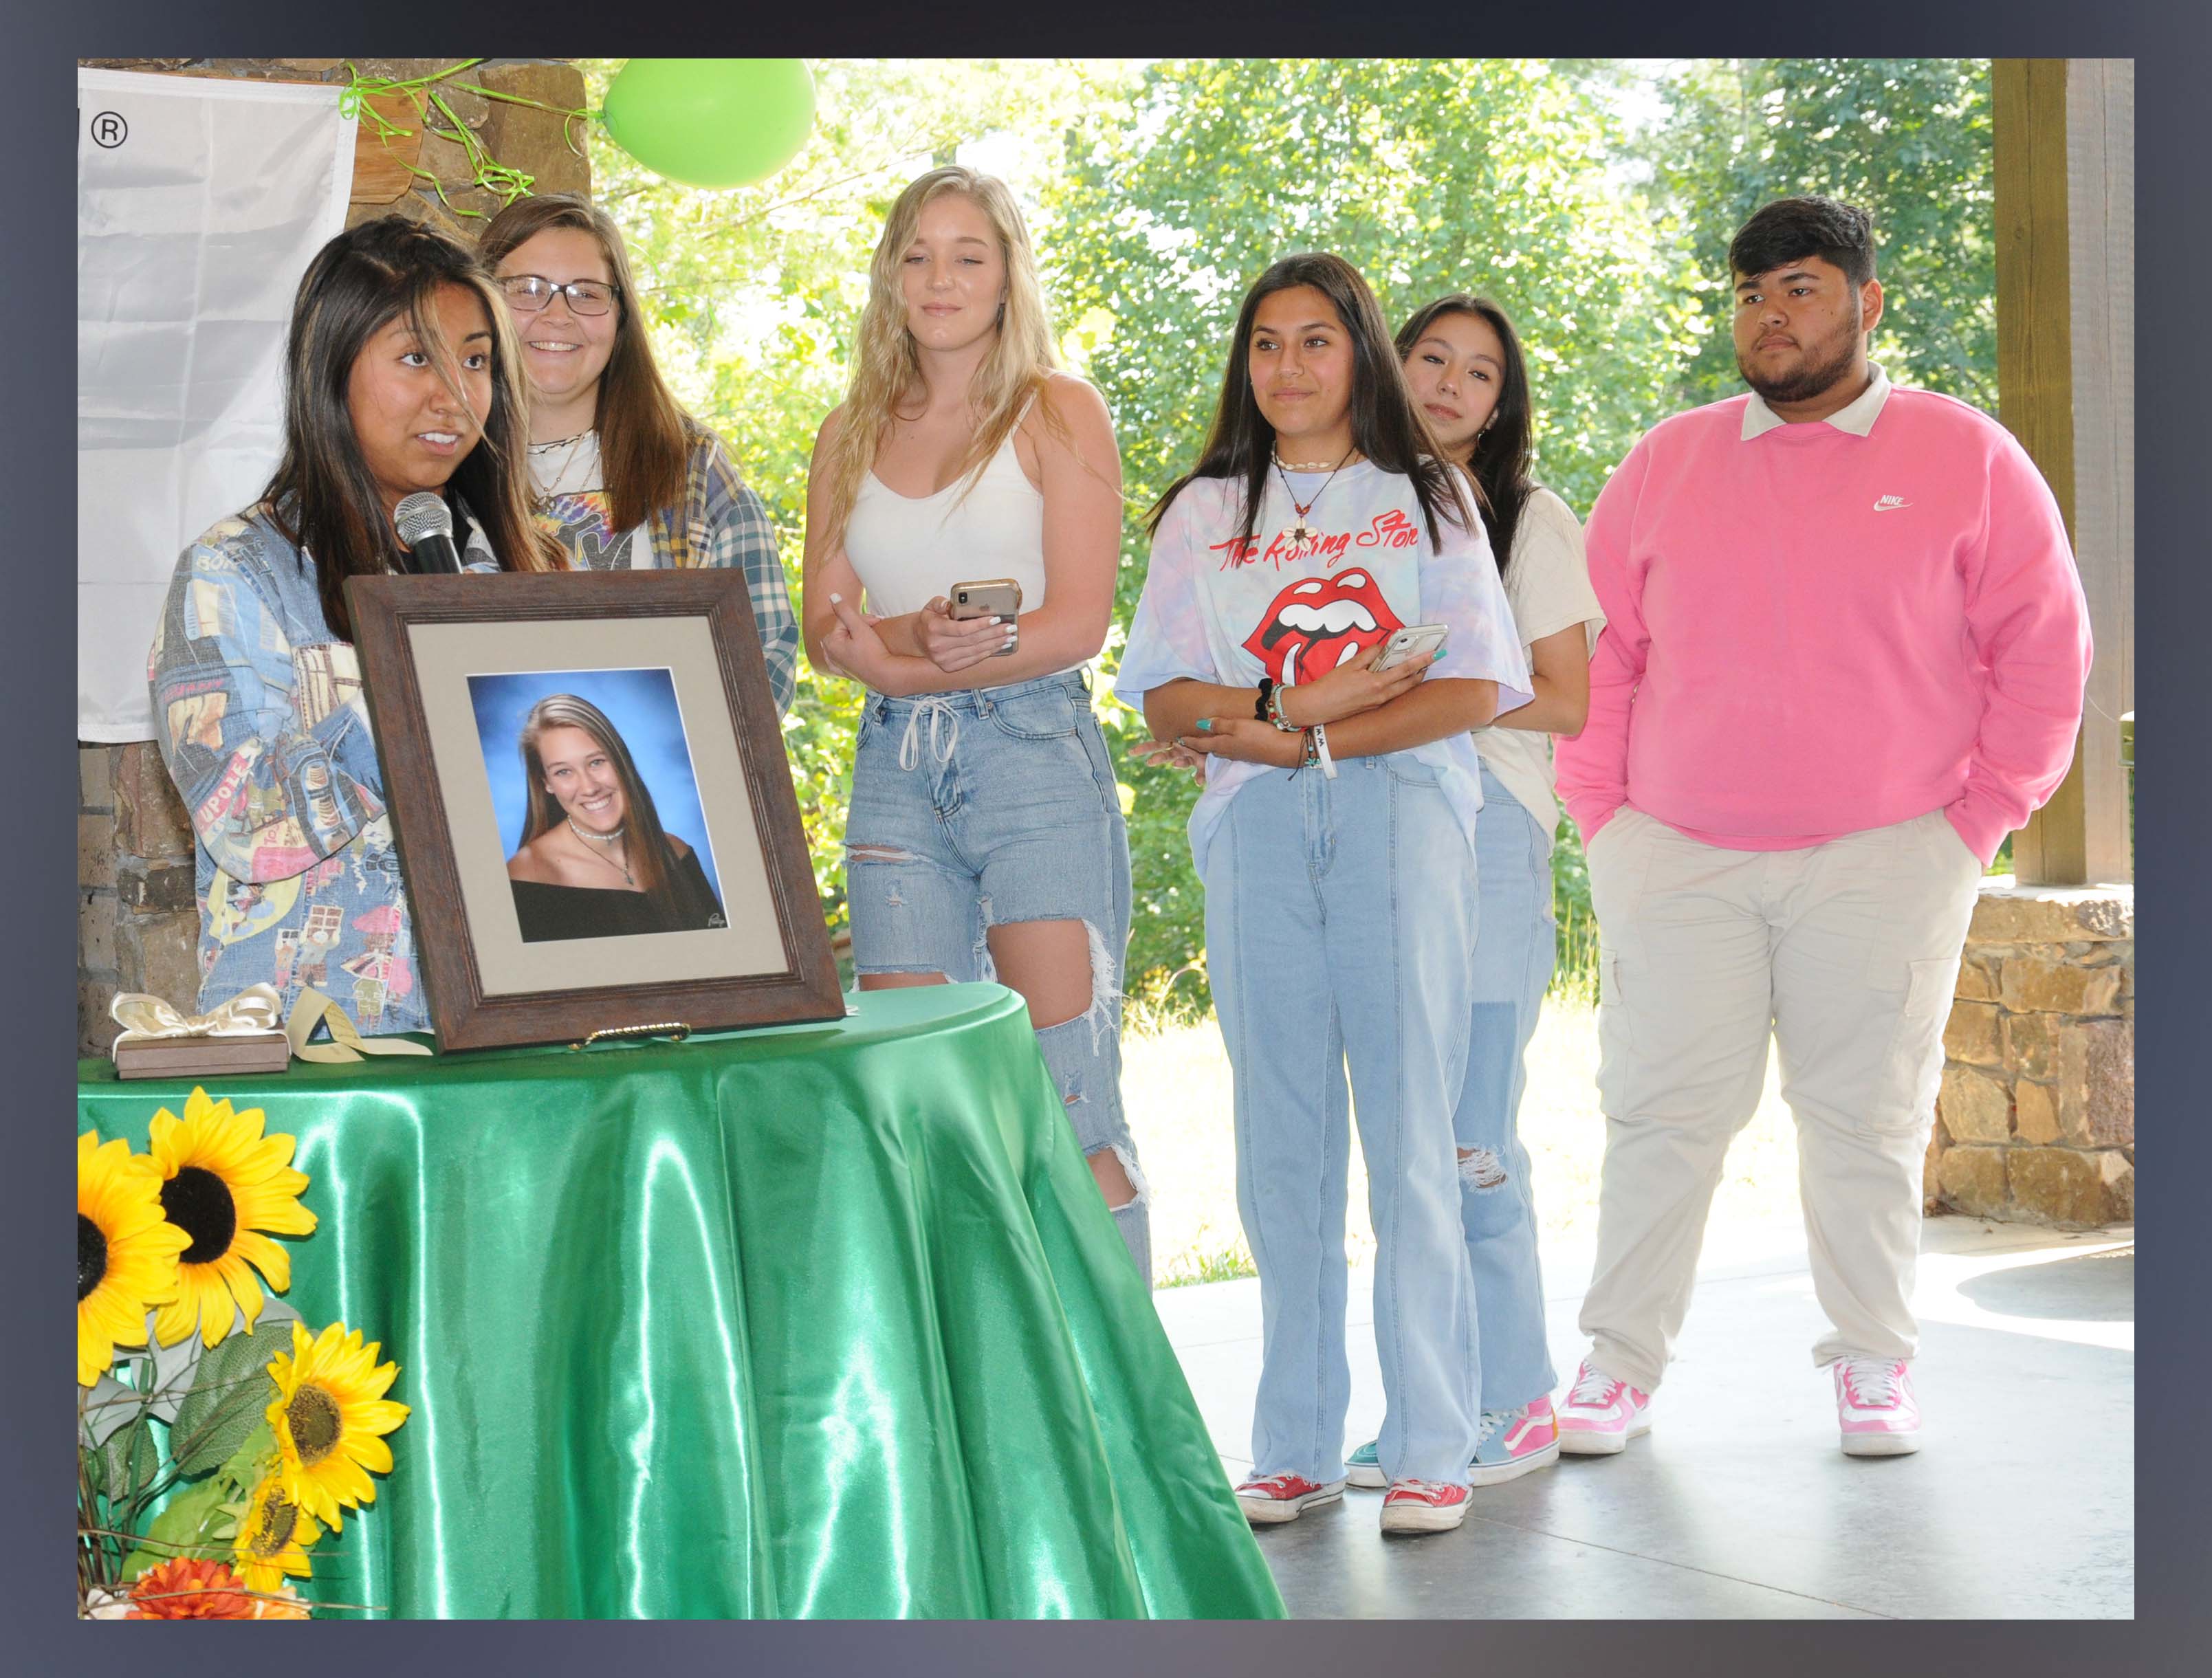 This group of Sydnie Grace Jones’ friends shared fond memories of theirs during intersection dedication ceremonies last week. Shown, from left, are, Samantha Rosas, Maddie Mitchun, Saidee Collins, Lesley Salas, Emily Salas, and Tony Leal.